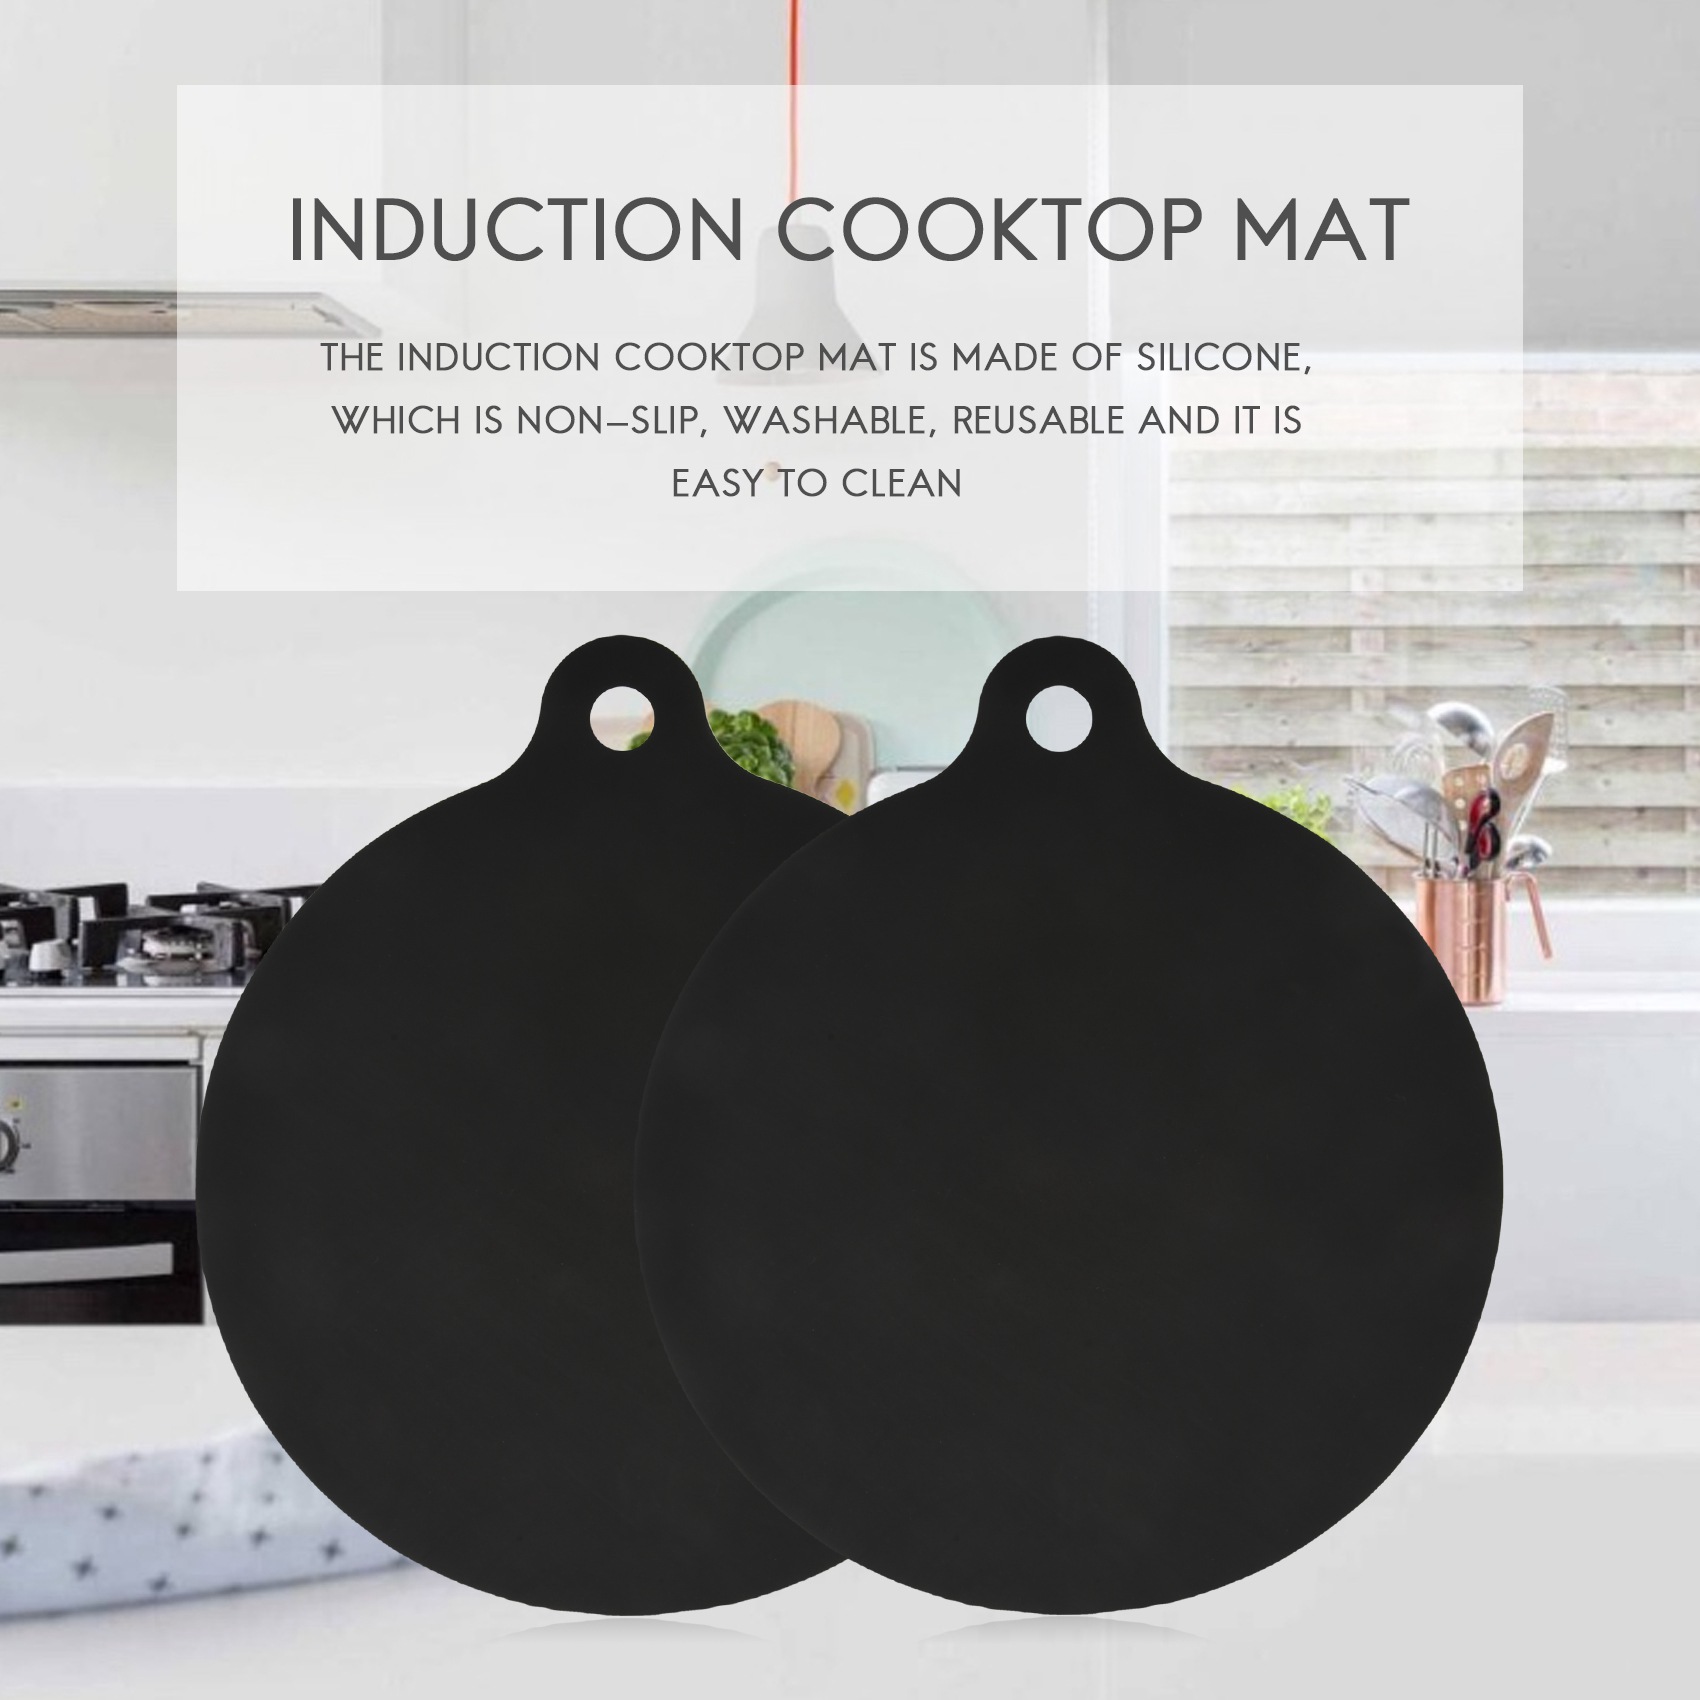 6 Pcs Induction Cooktop Mat Protector Nonslip Silicone Heat